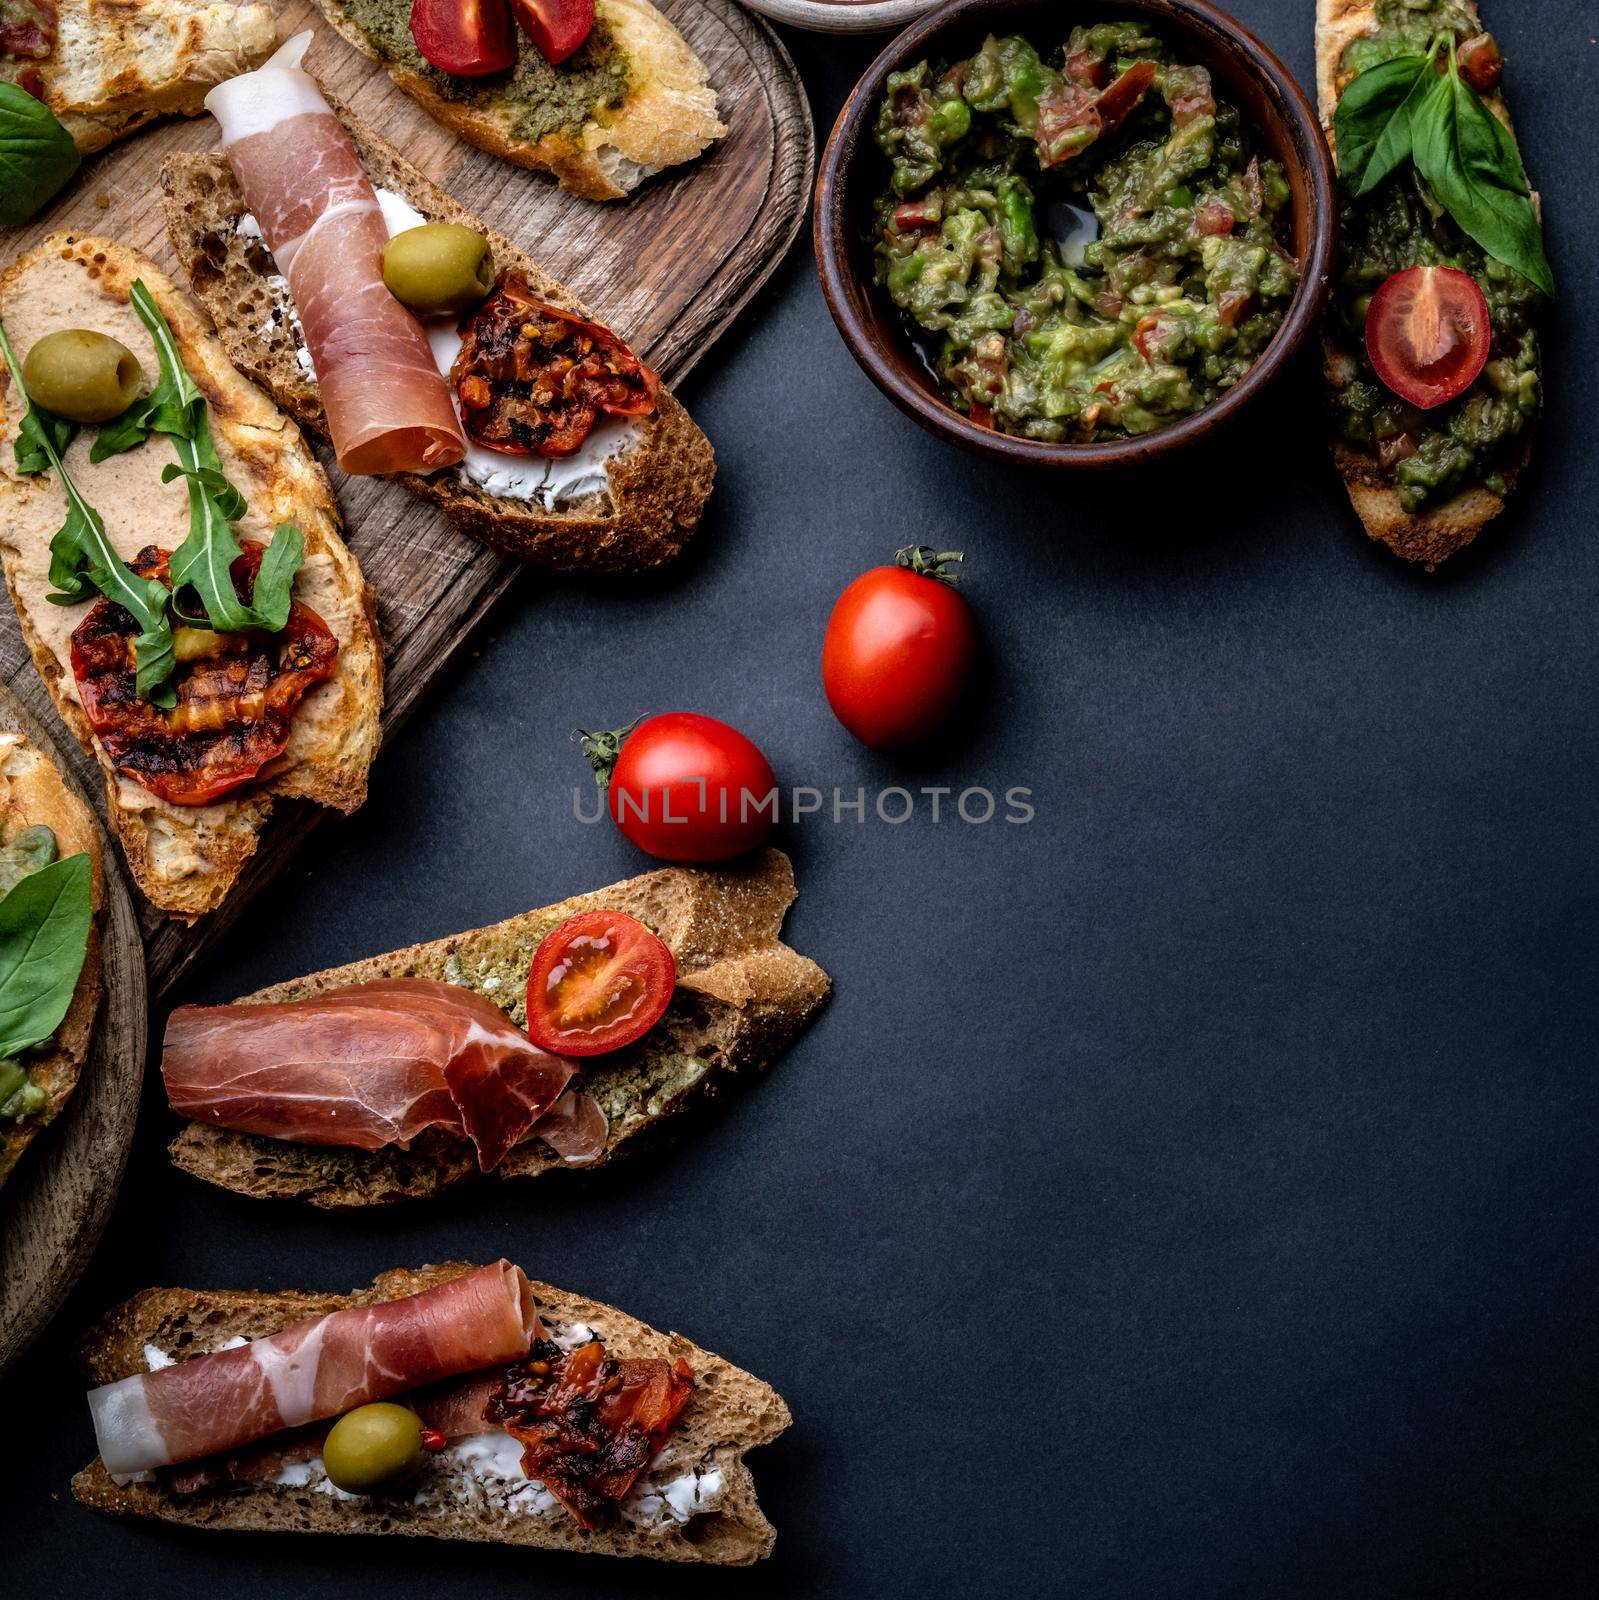 Set of bruschettas with jamon, olives, pesto, tomatoes, basil and mozzarella served on wooden board with guacamole and cherries. Traditional mediterranean antipasti food composition with copy space